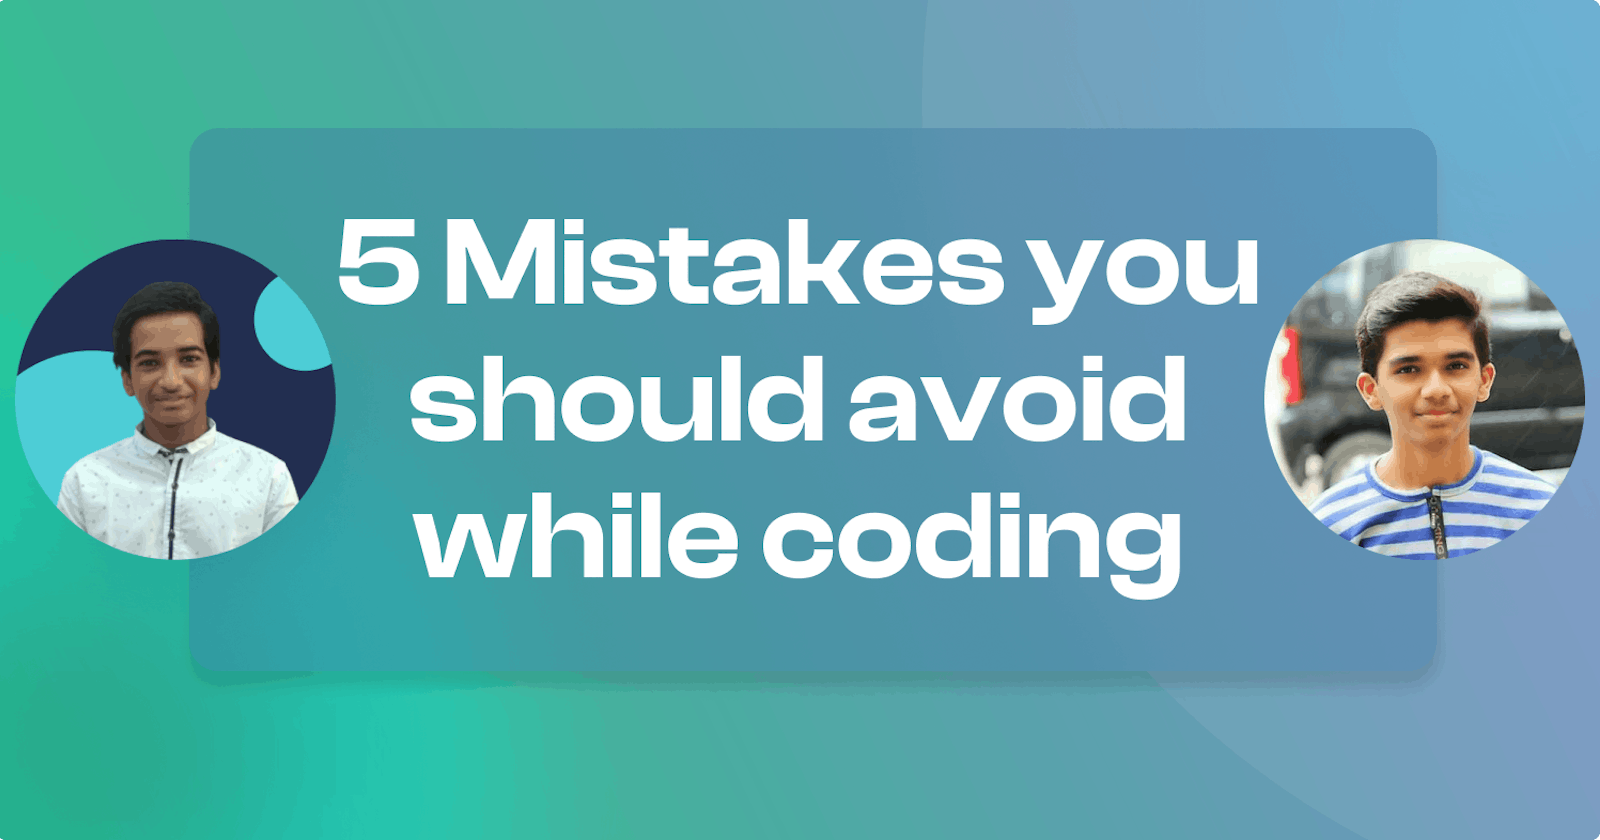 5 Mistakes you should avoid while coding